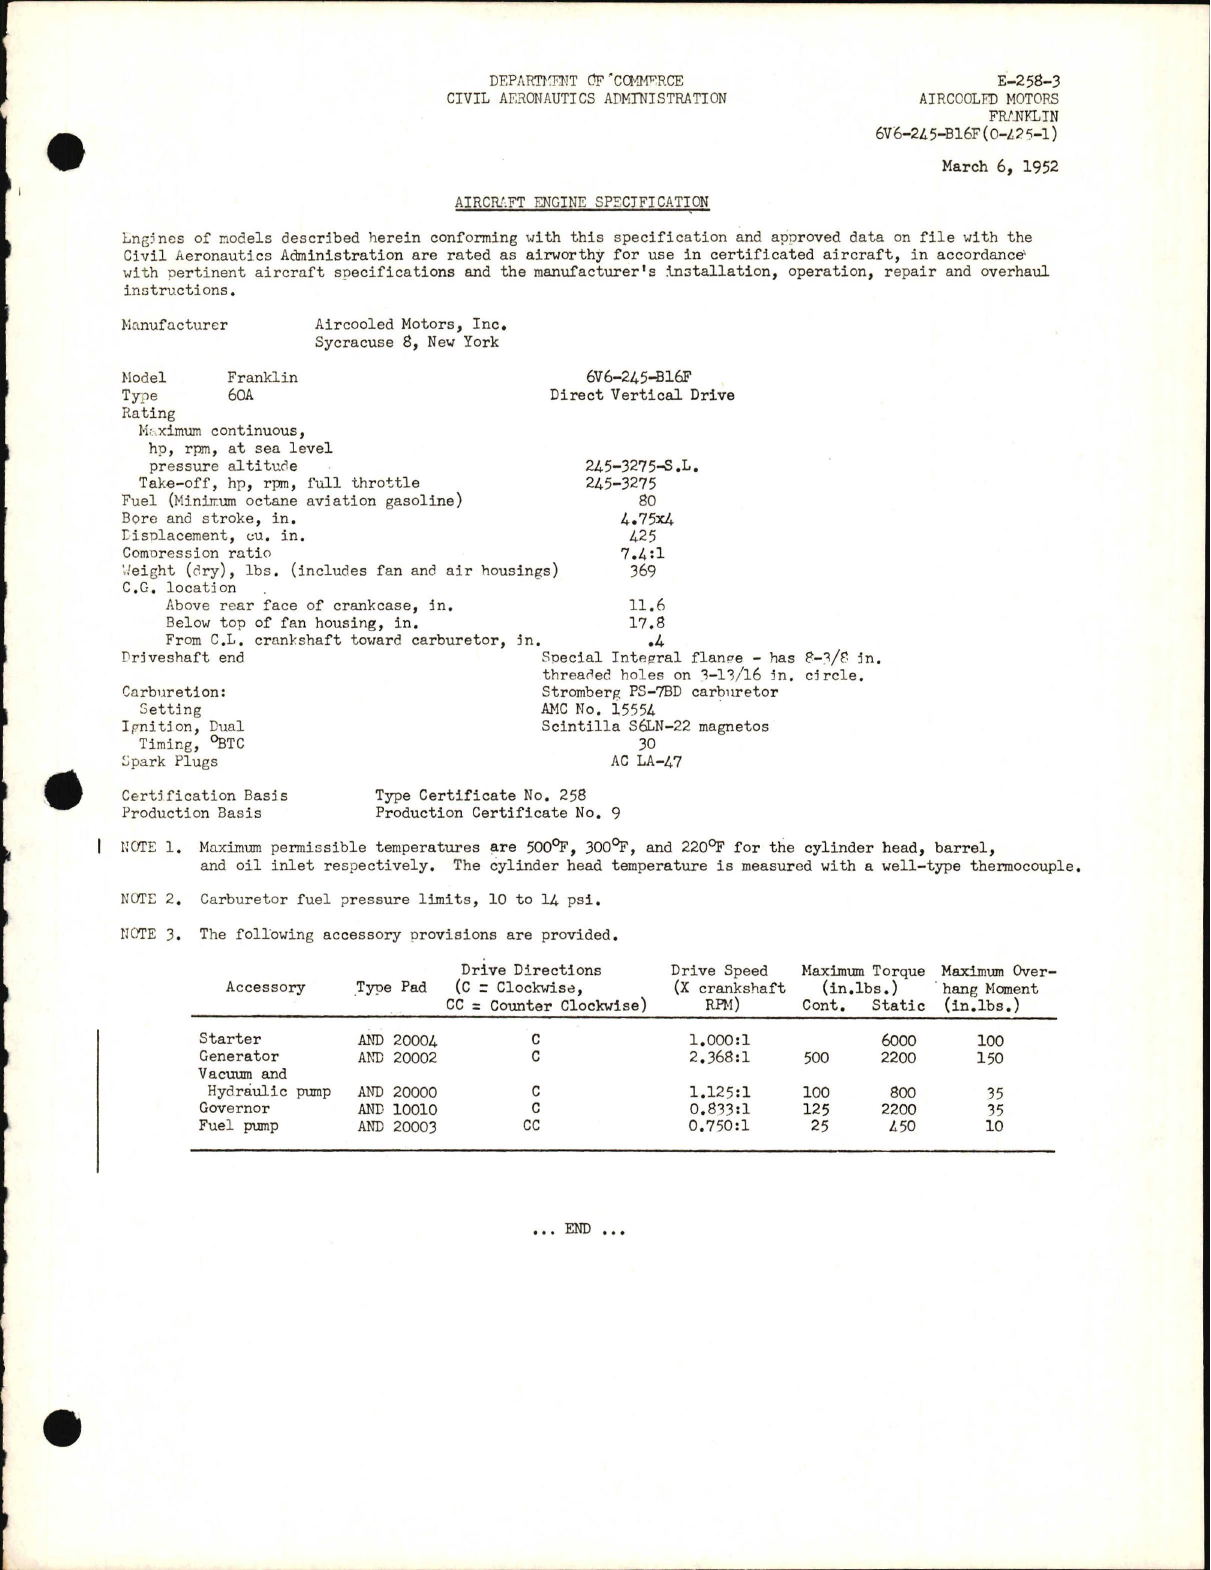 Sample page 1 from AirCorps Library document: 6V6-245-B16F and O-425-1 Air Cooled Motors